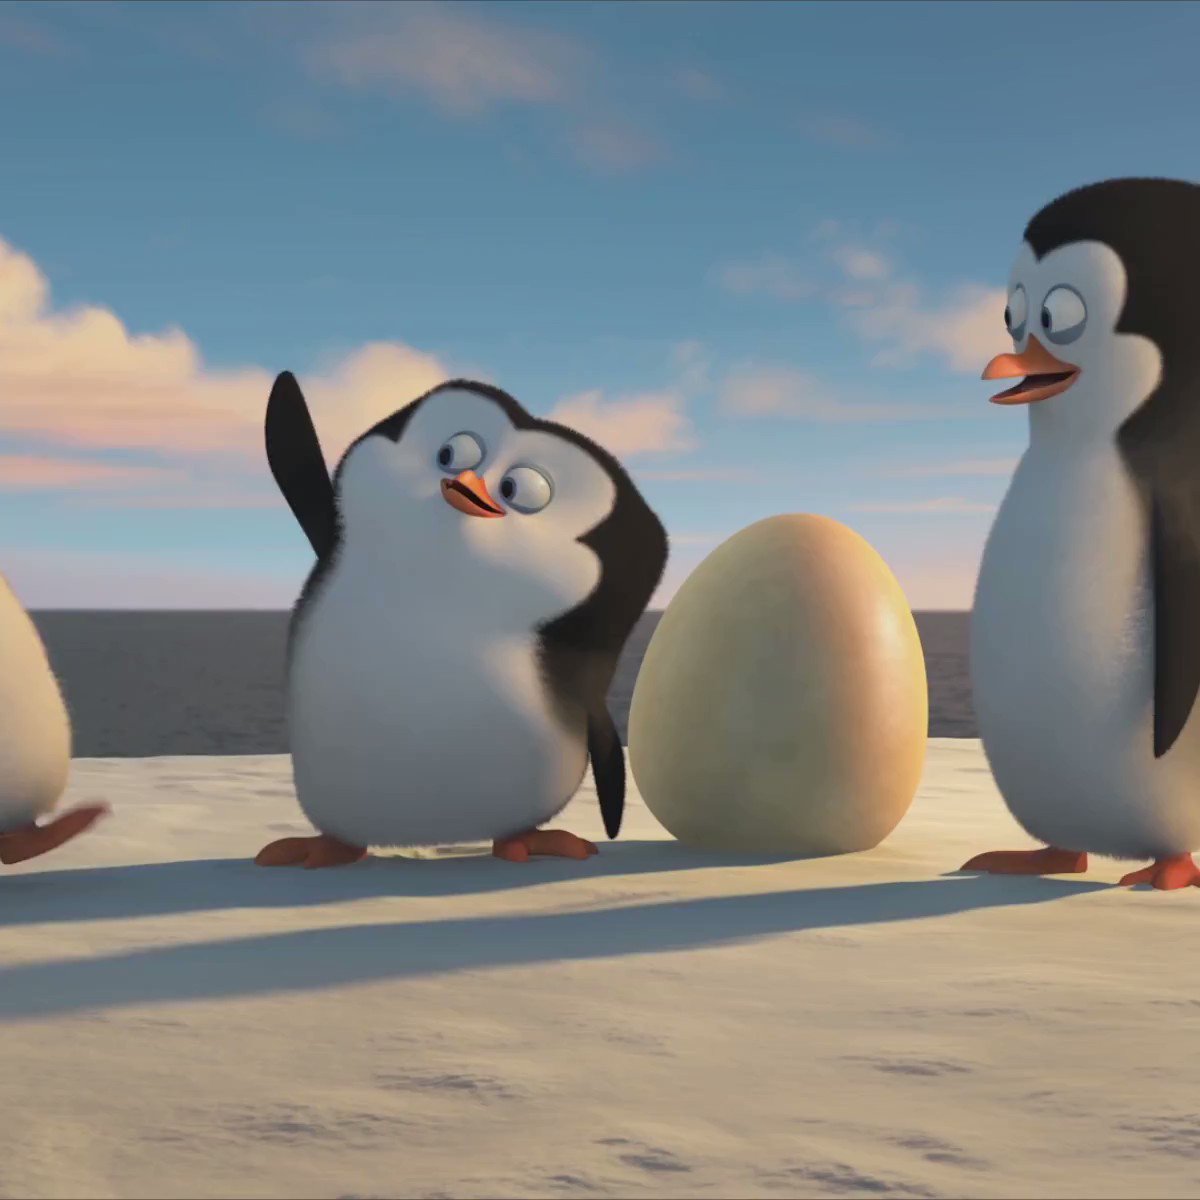 RT @swiftsambi: Penguins when they get to see Lewis Hamilton #F1 

 https://t.co/dXh0kBycPS